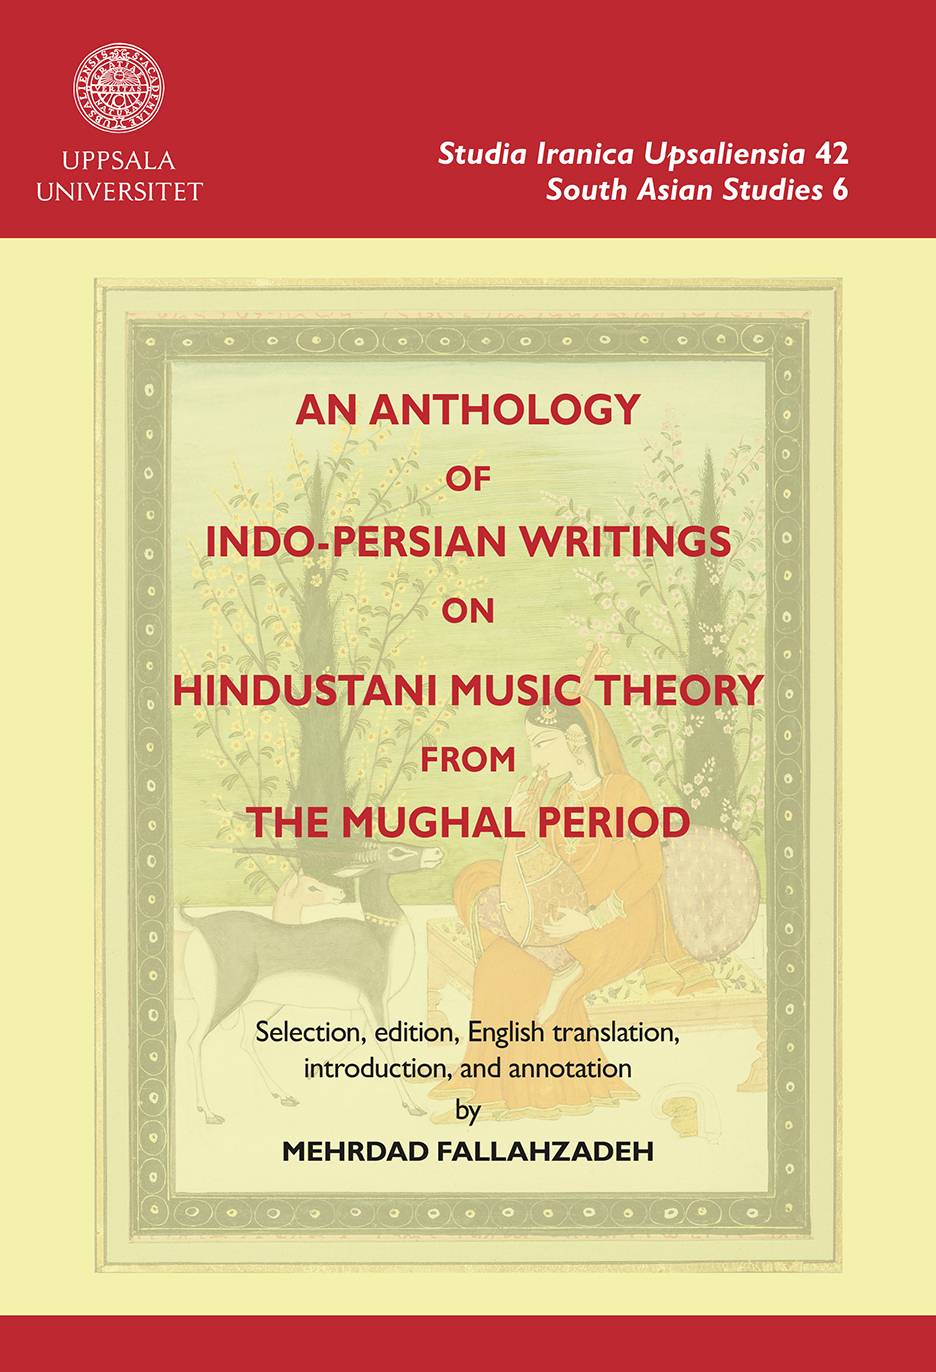 An anthology of Indo-Persian writings on Hindustani music theory from the Mughal period